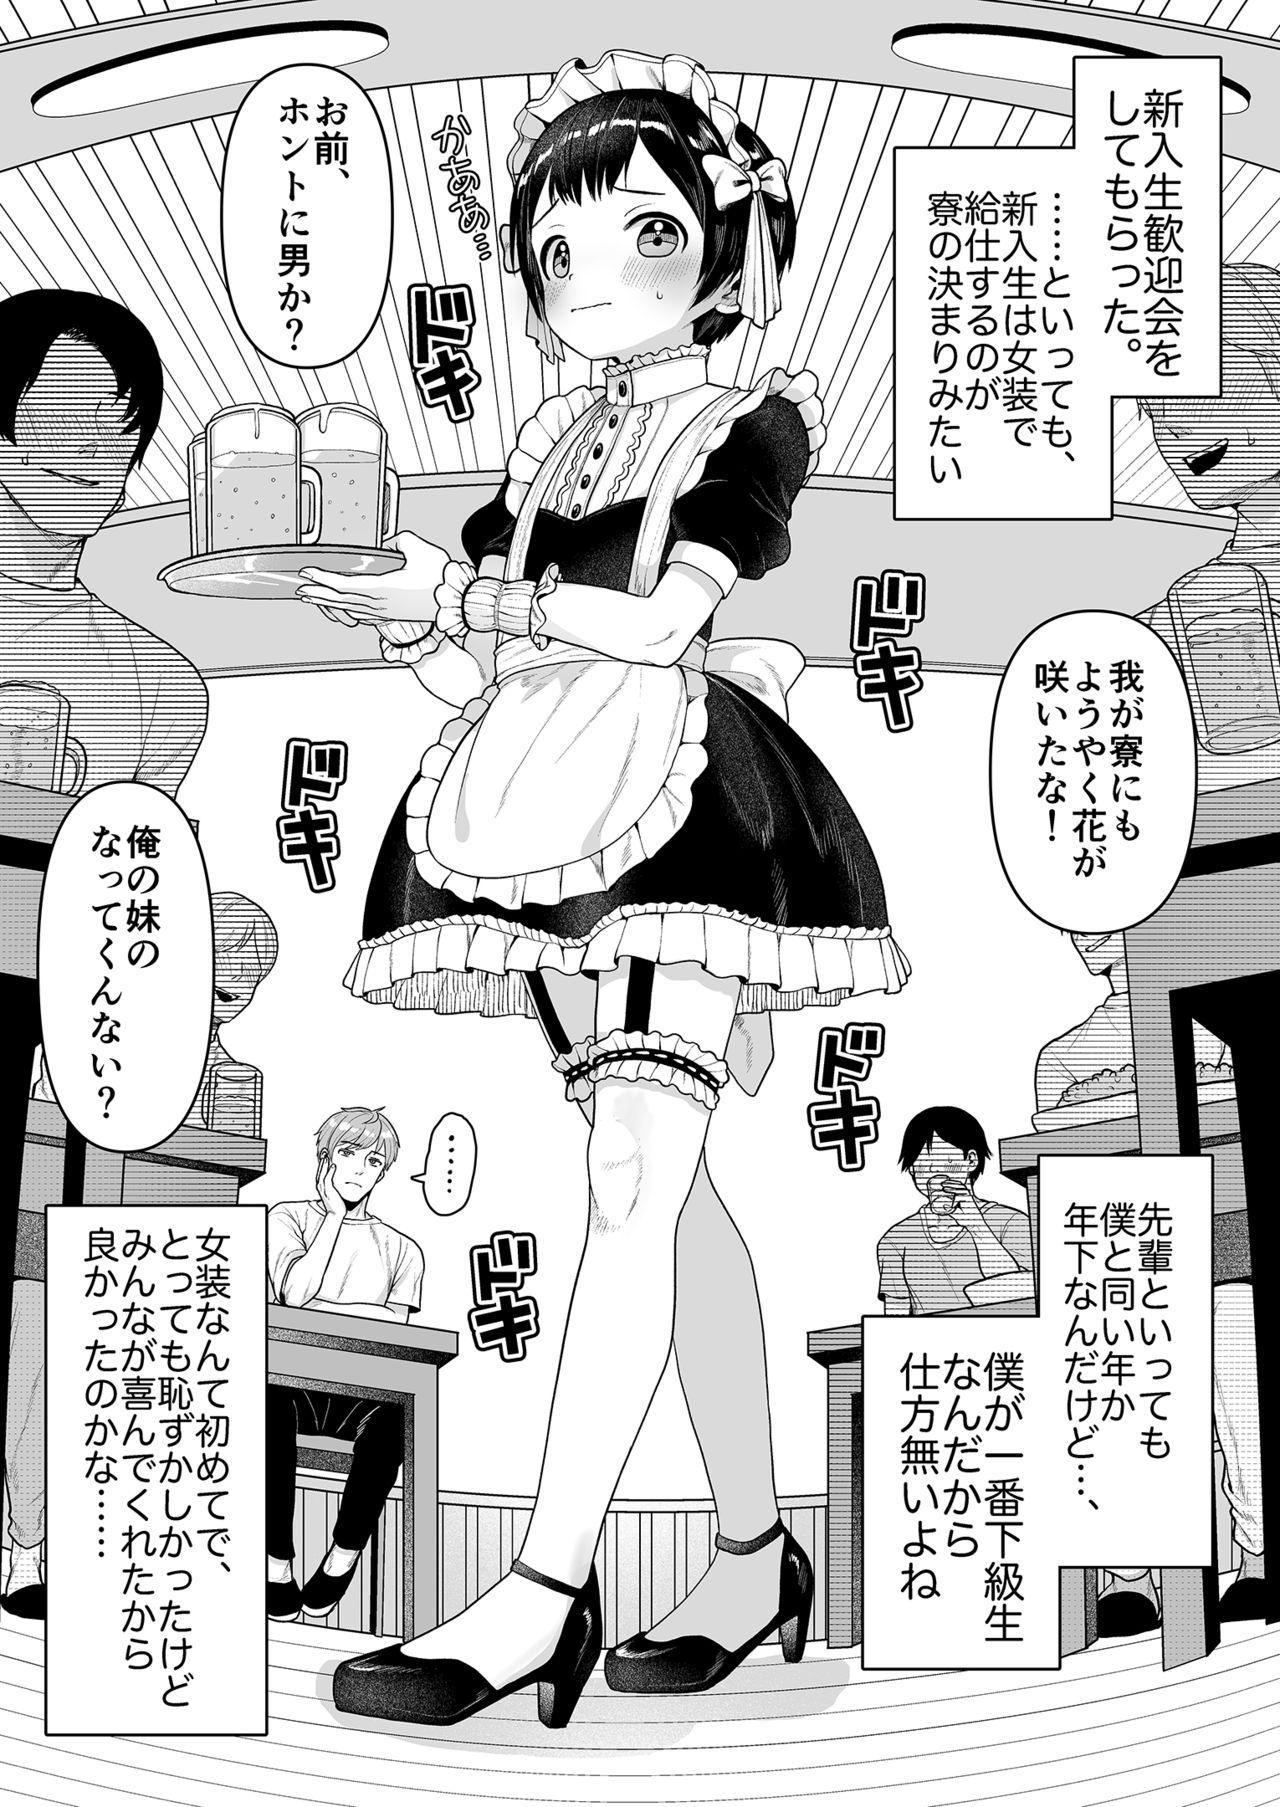 Exgf Yuito is a Great Little Sister - Original Food - Page 3